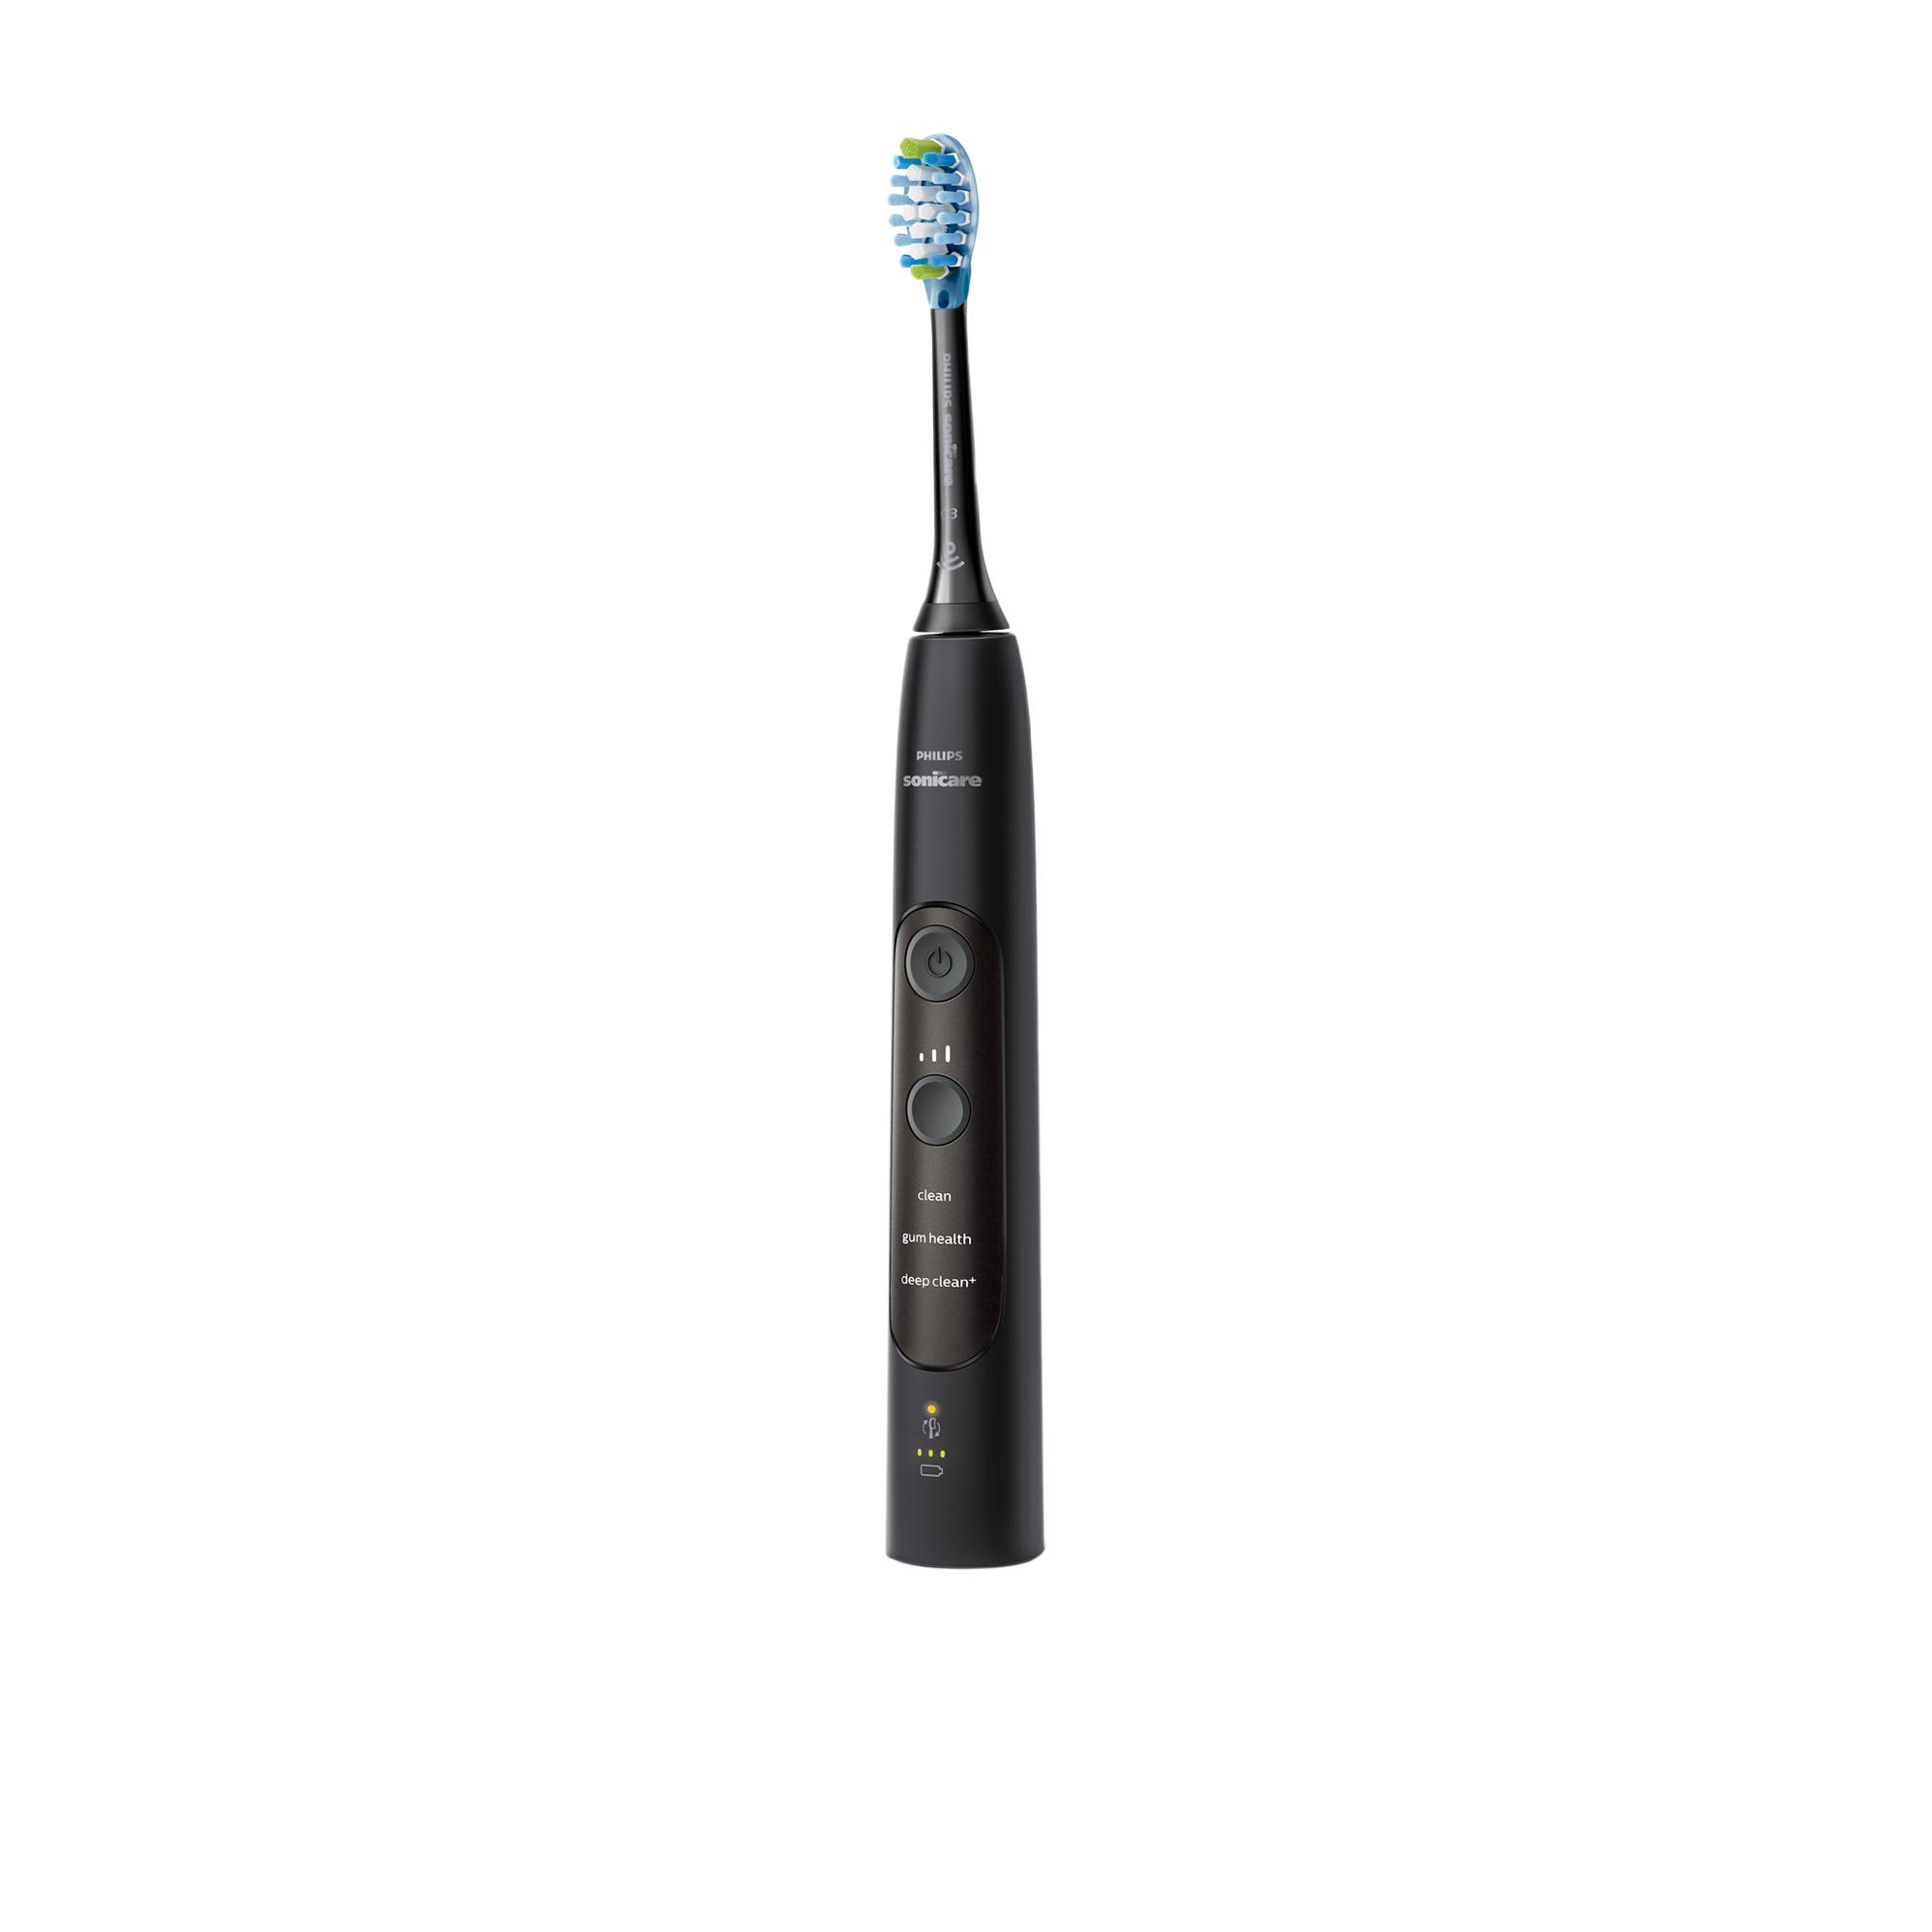 Philips Sonicare 7300 ExpertClean Electric Toothbrush Black Image 5